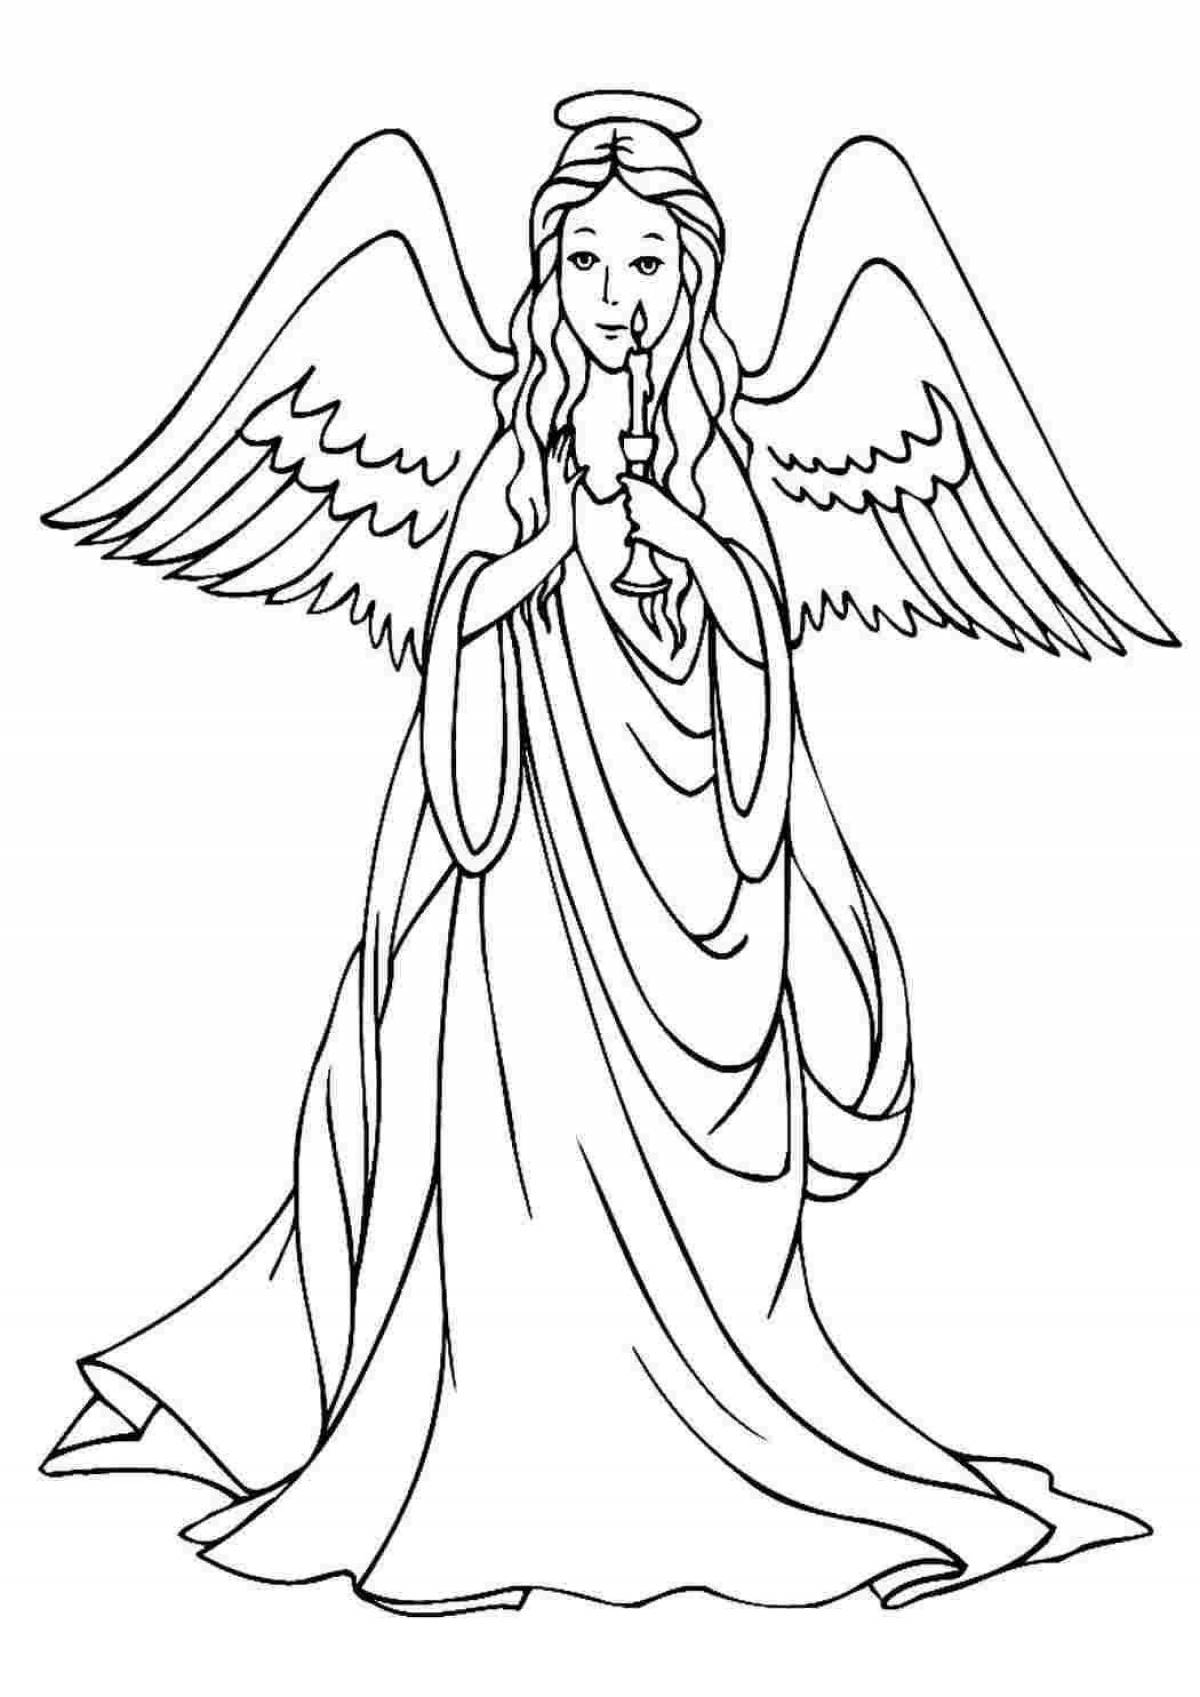 Great Christmas angel coloring book for kids